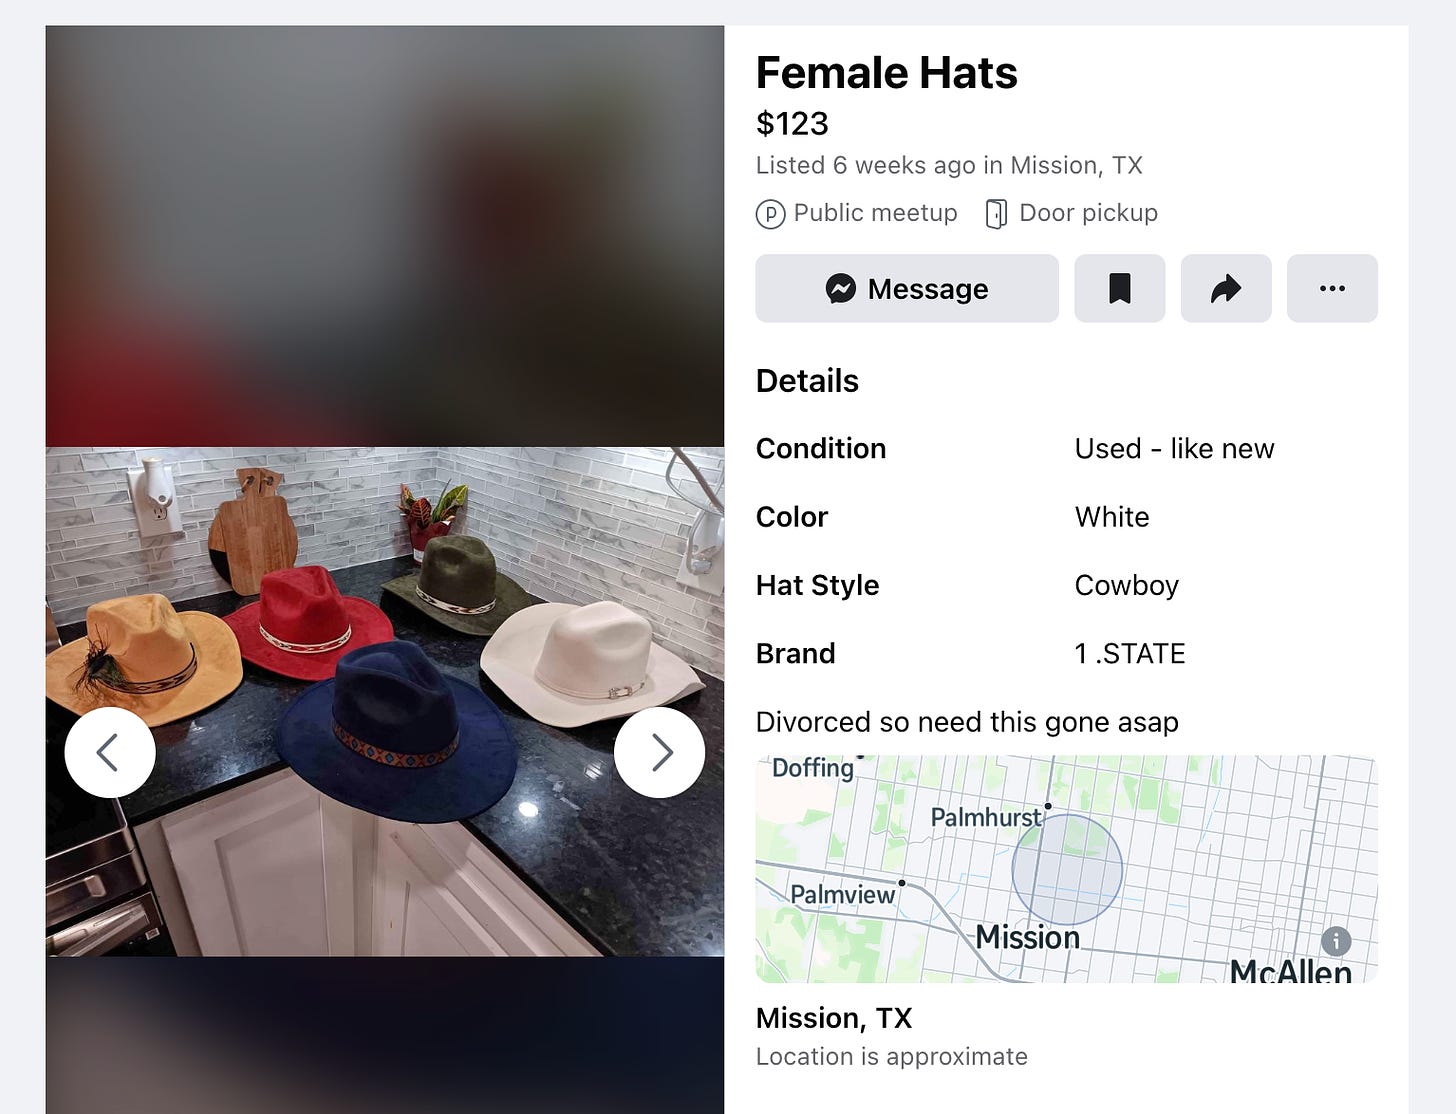 Facebook marketplace listing titled "Female Hats" $123. "Divorced so need this gone asap"